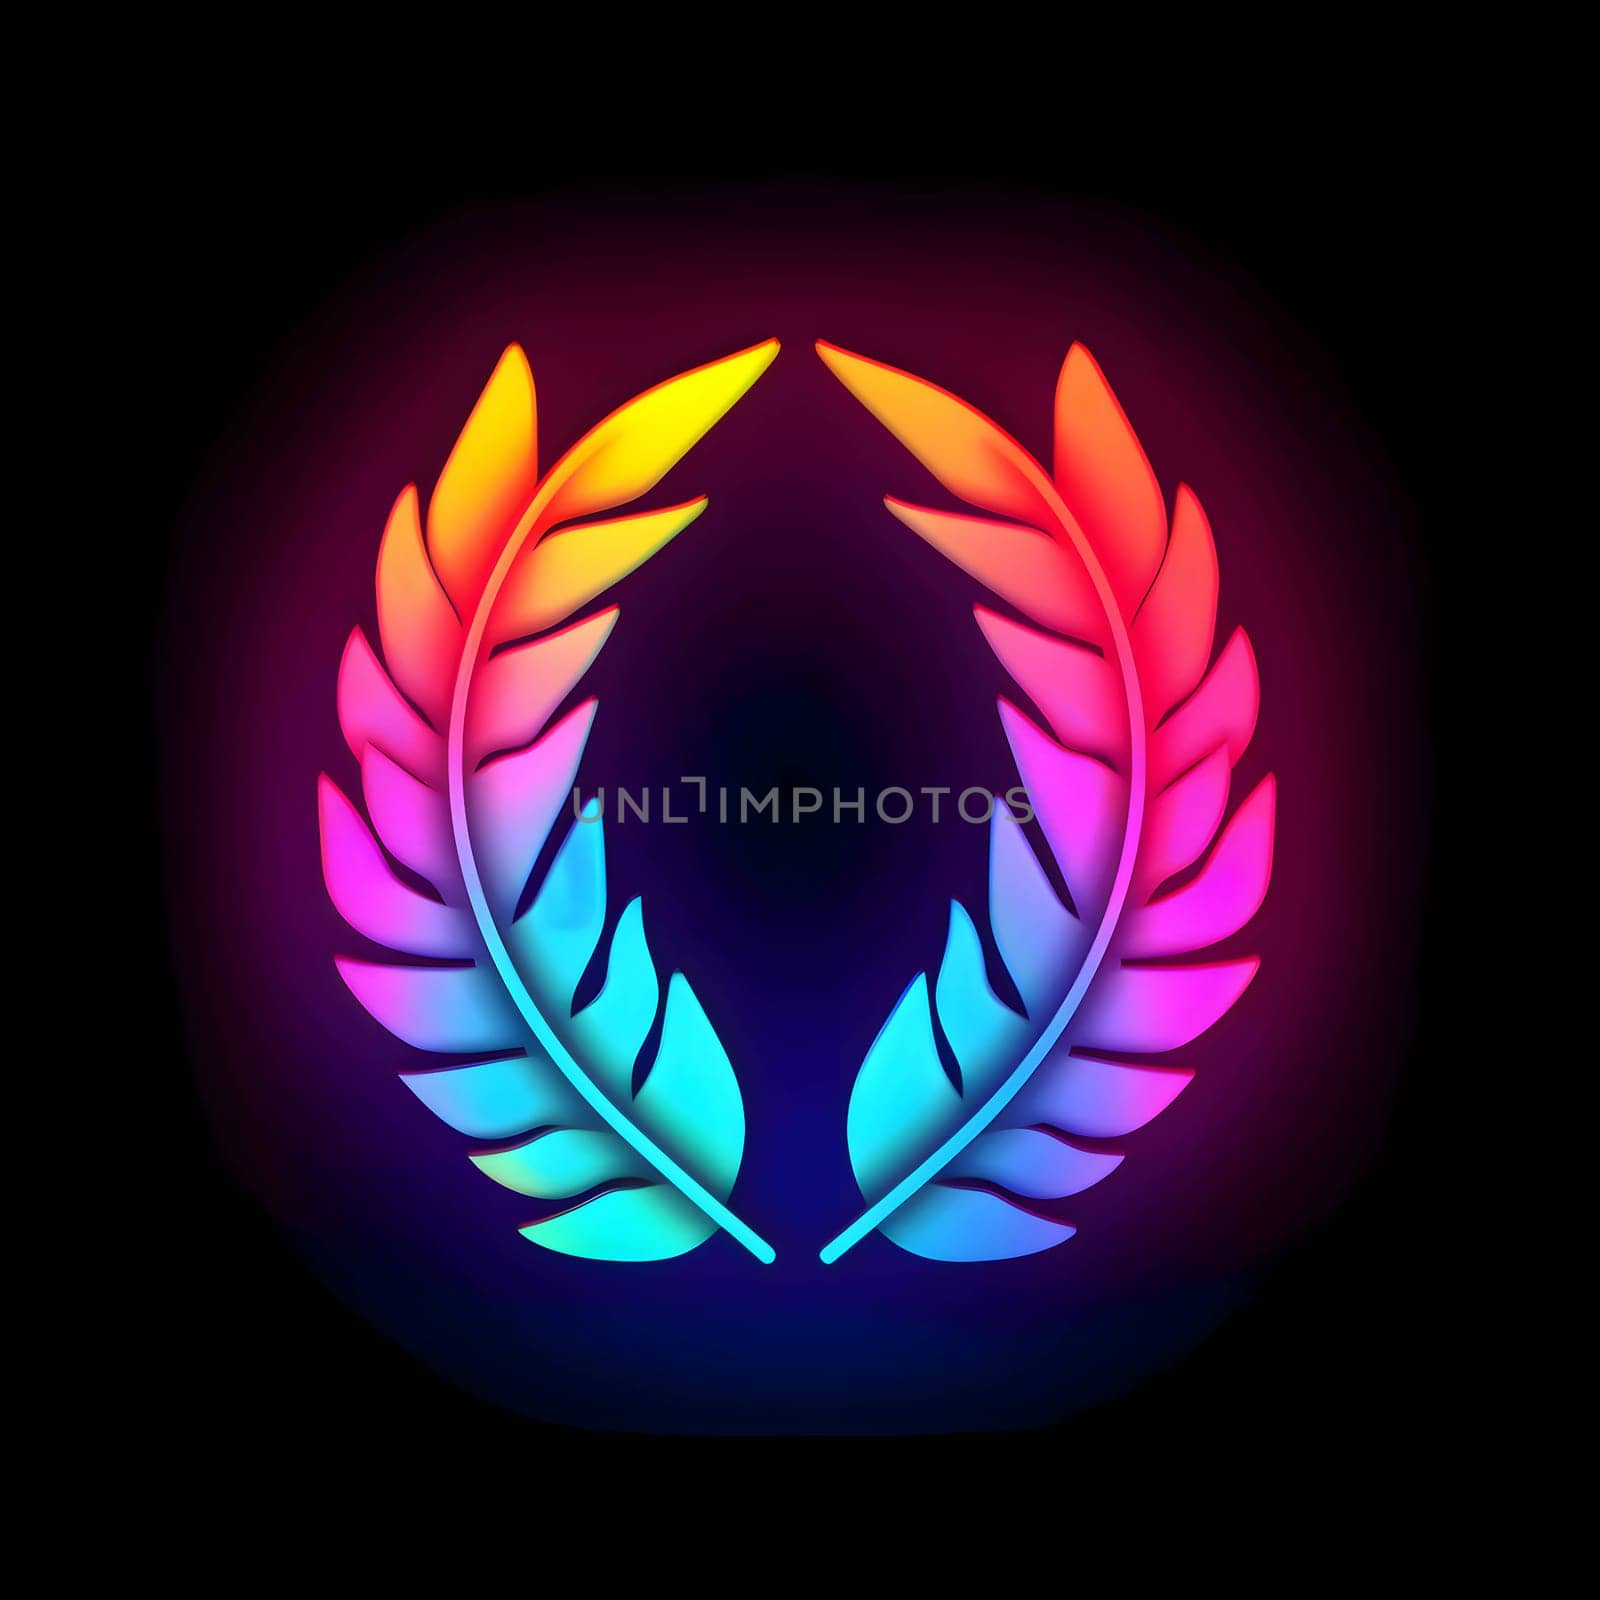 Logo concept featuring two colorful laurel leaves on a dark background, symbolizing victory, pride, and celebration.